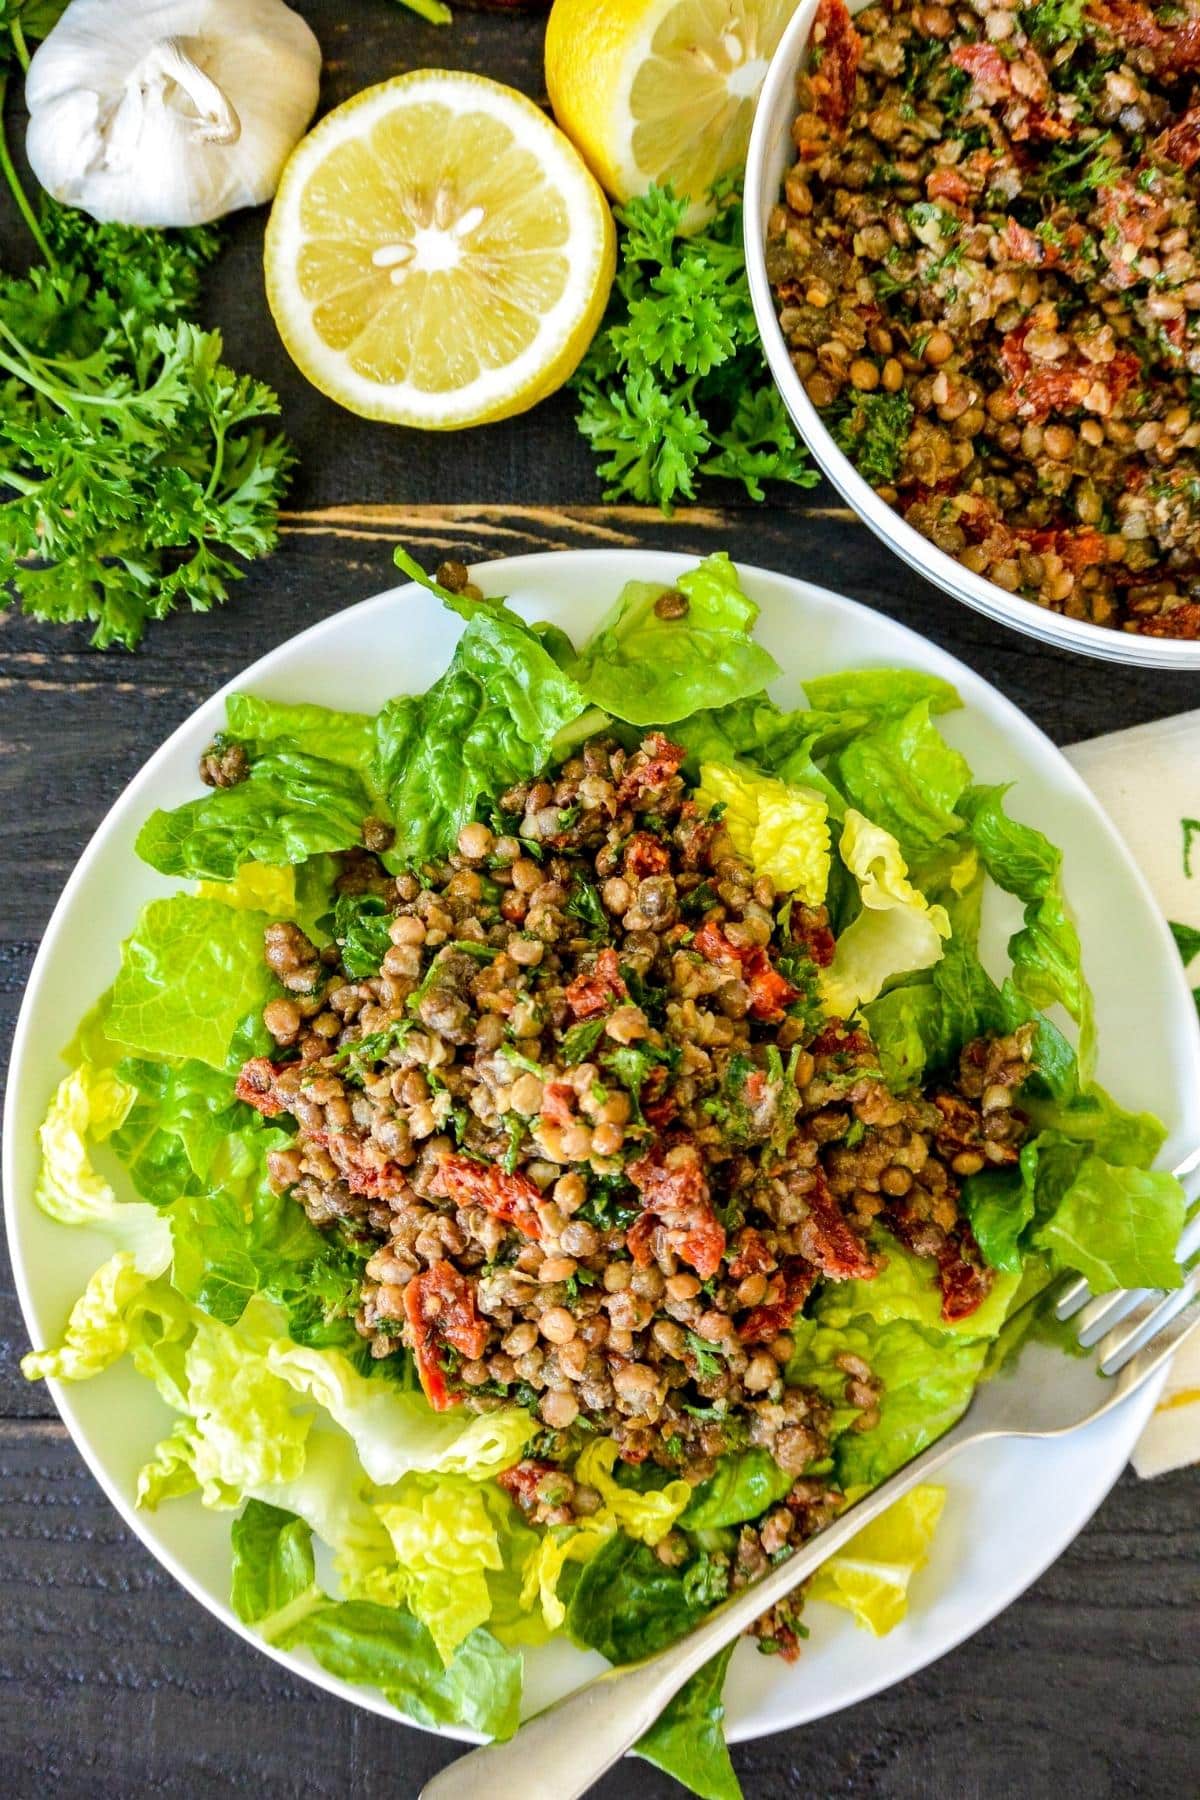 Plate with lentil salad on bed of chopped romaine lettuce with lemon, garlic, parsley, and salad bowl in the background.